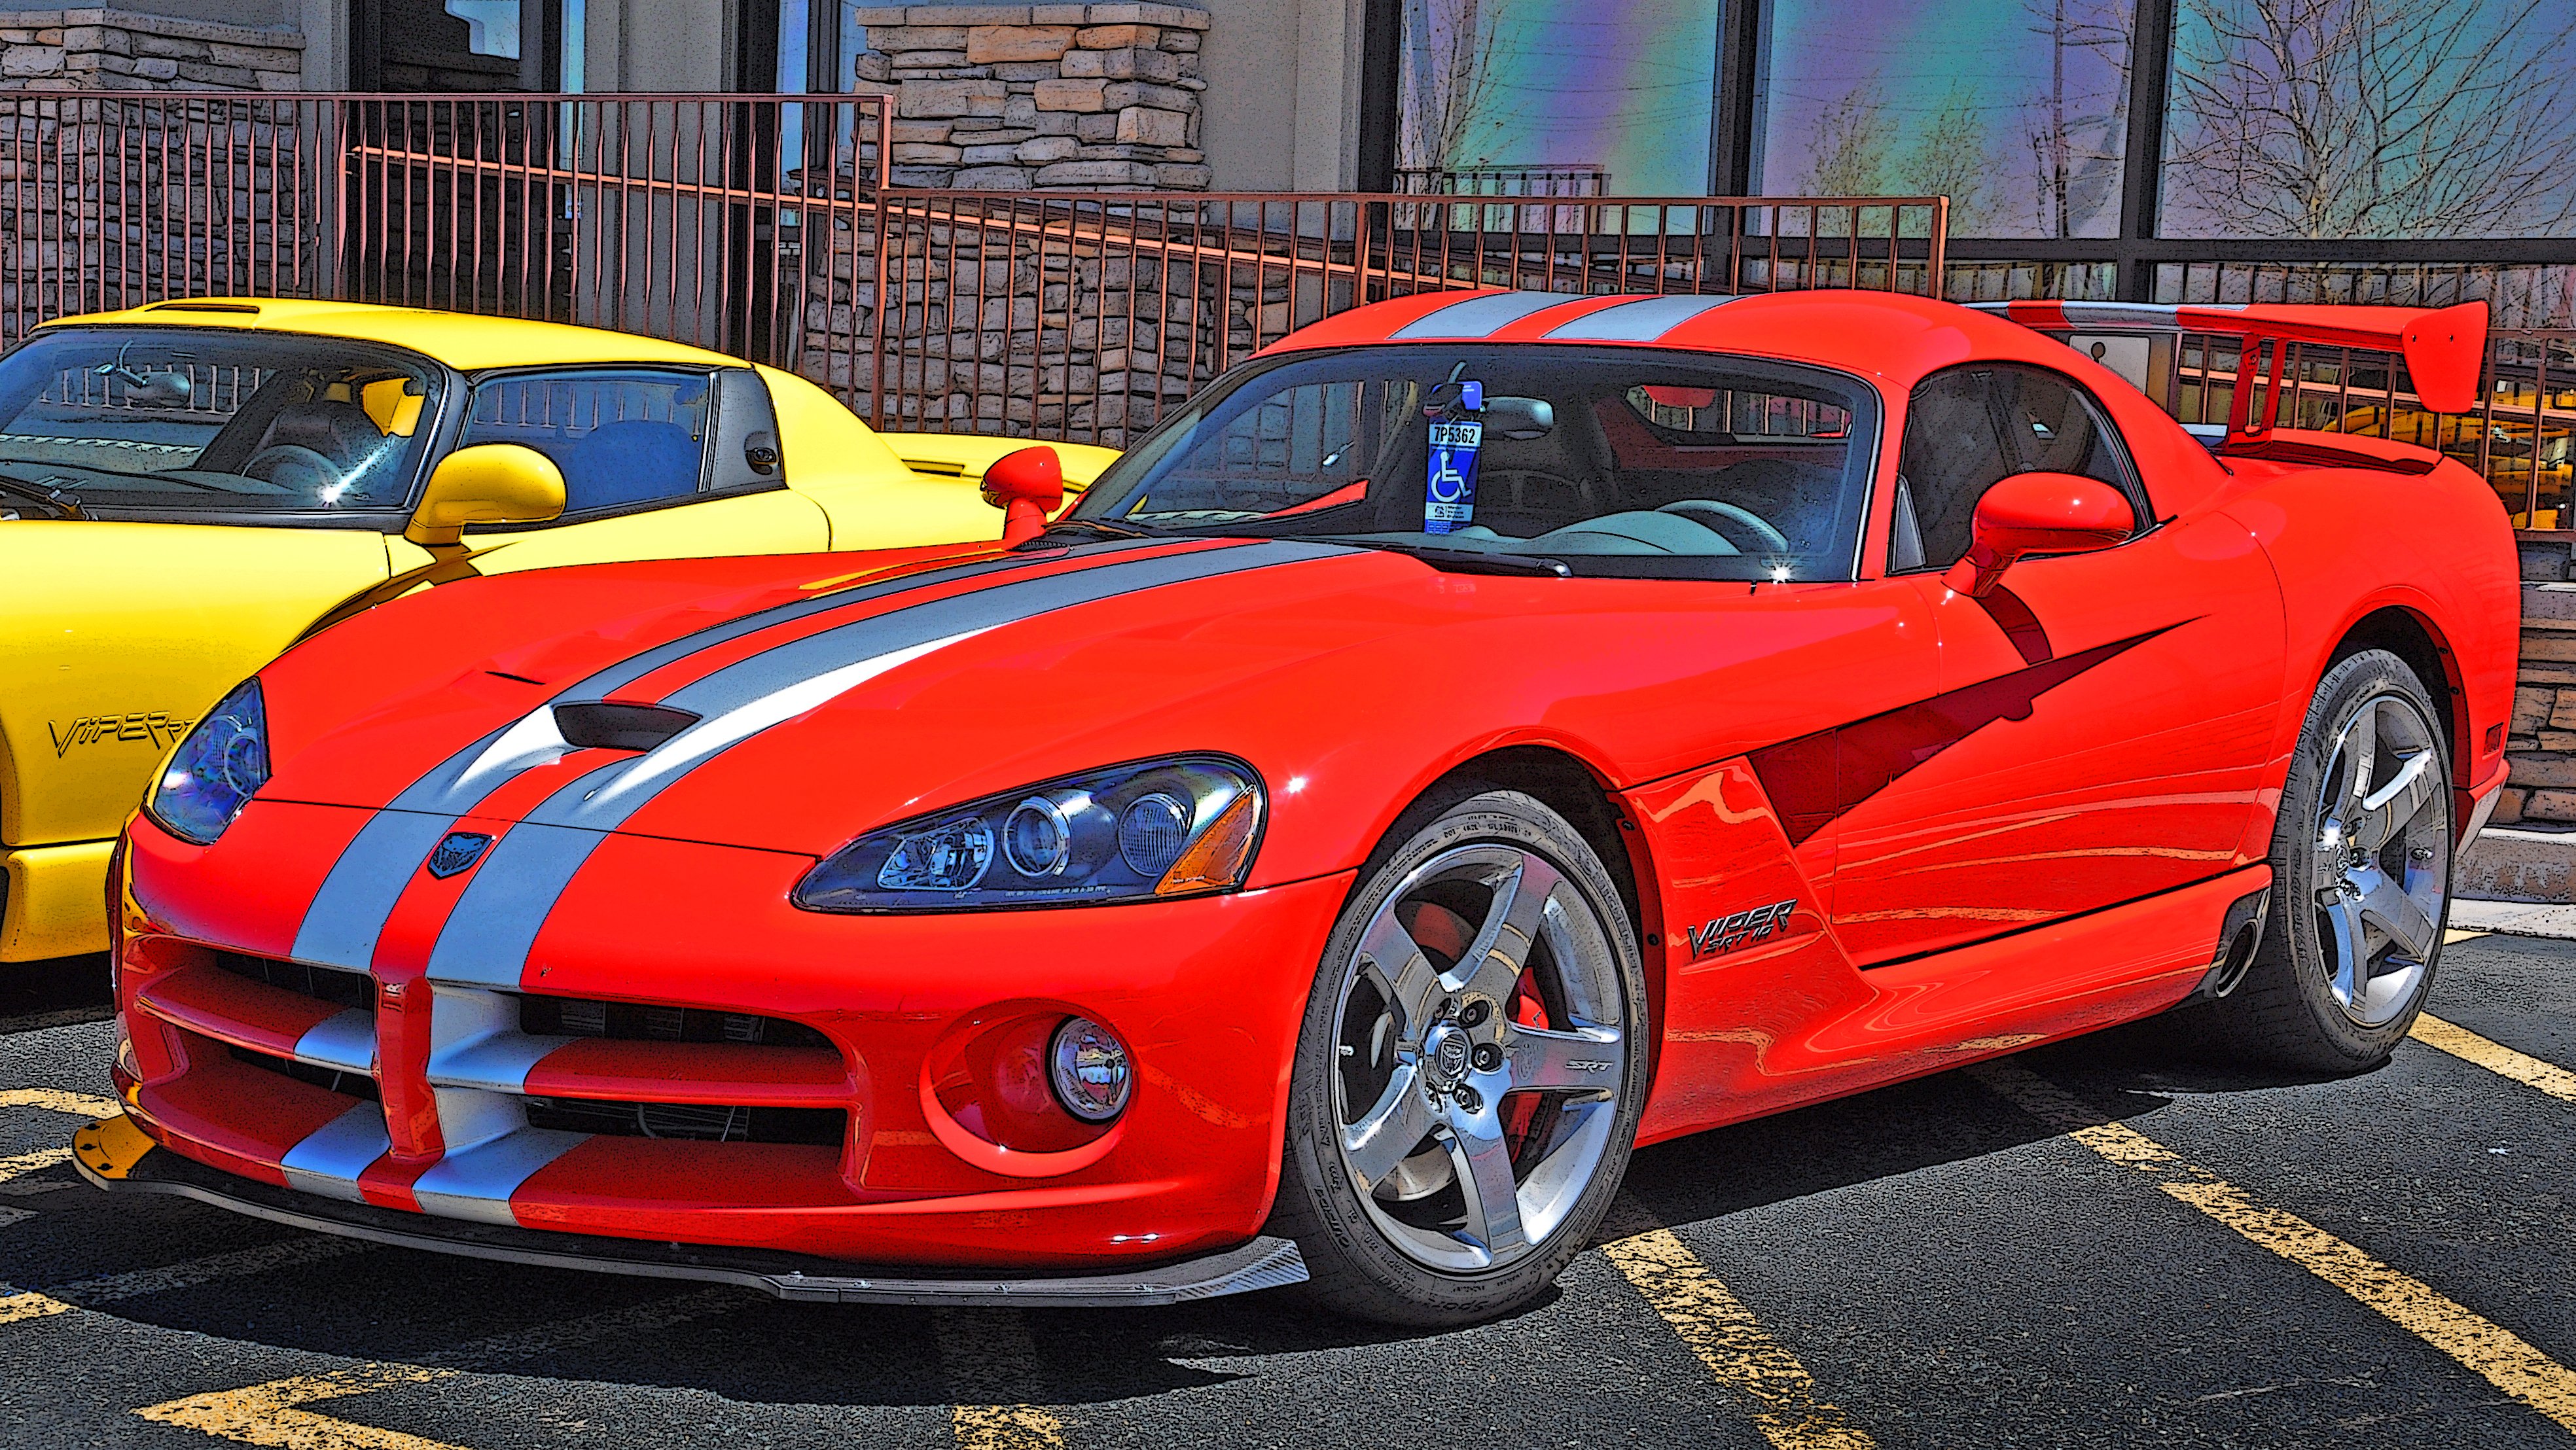 httpsdodge gts muscle srt supercar viper cars usa red 24